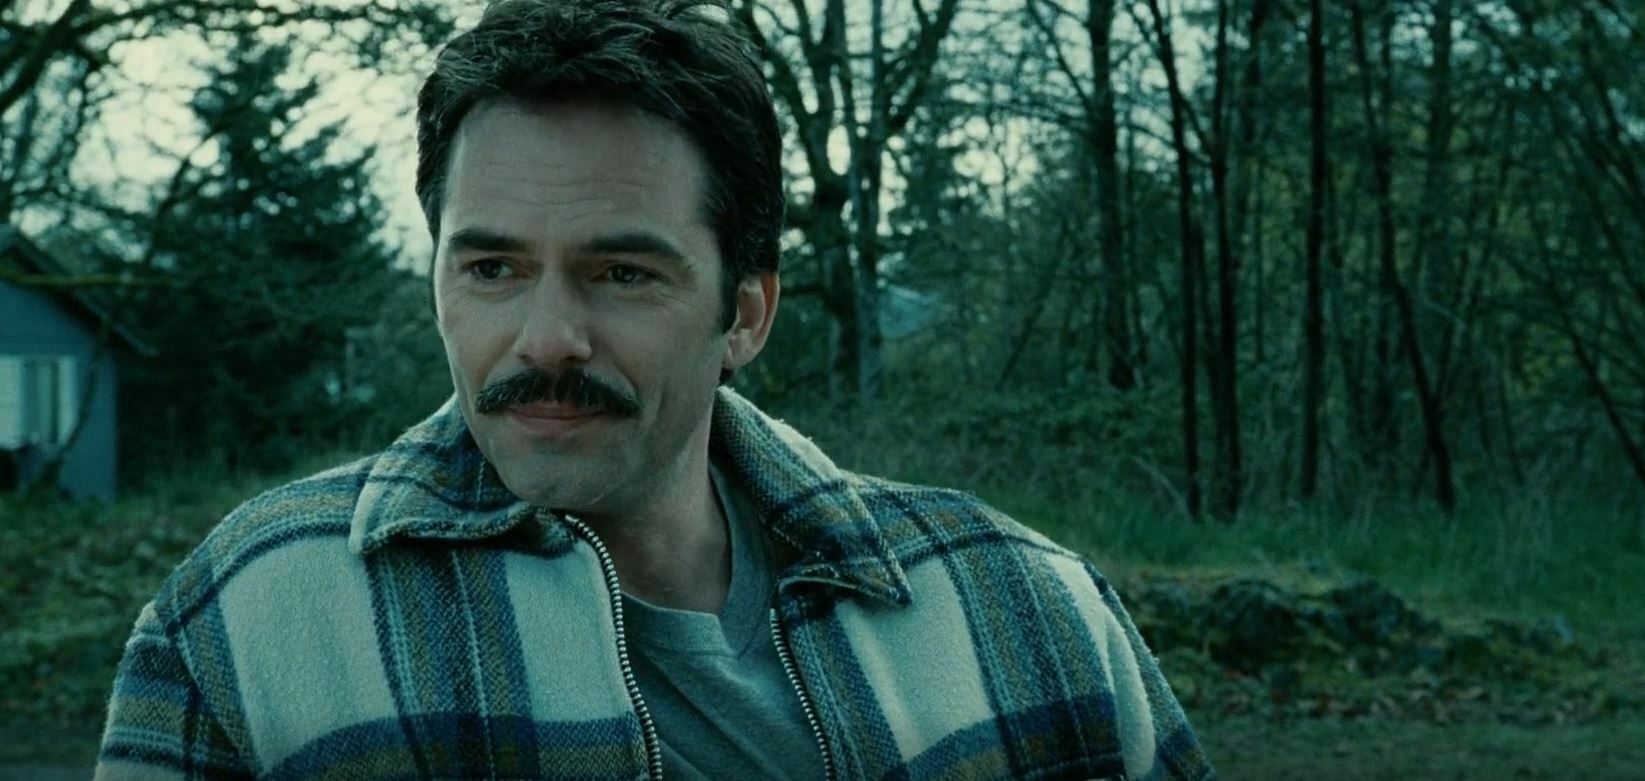 twilight’s charlie swan – biography, history, & character information